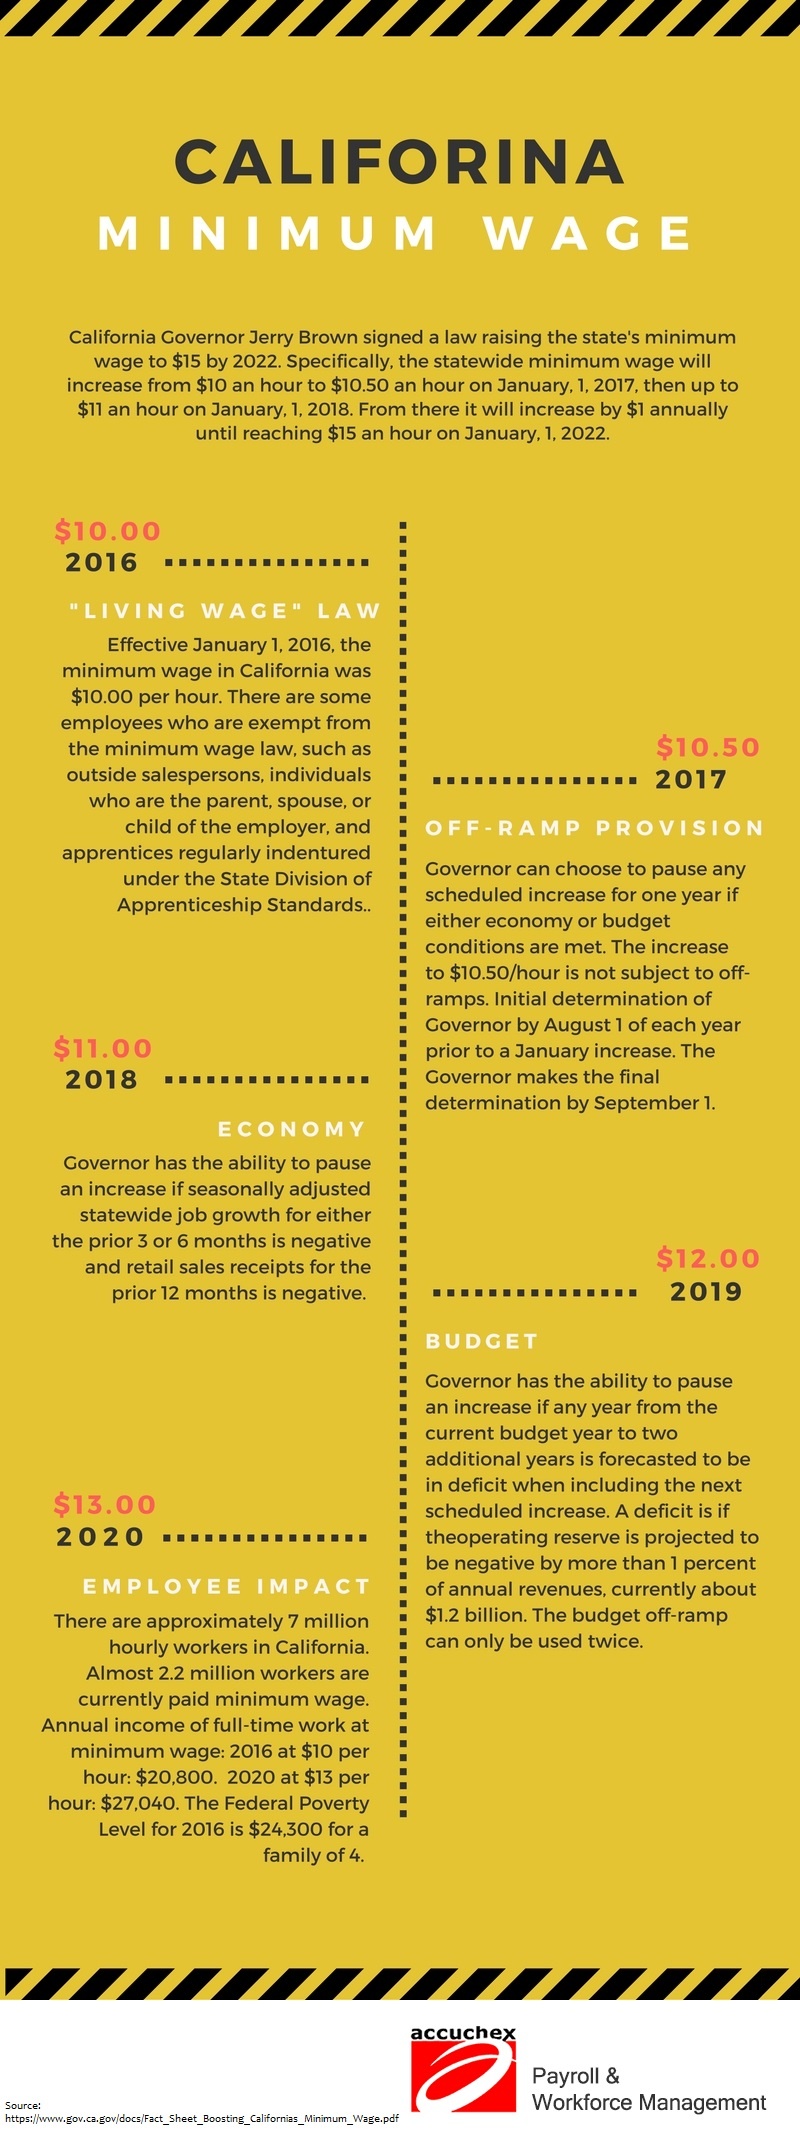 california-labor-law-reminder-for-2017-minimum-wage-increases-infographic